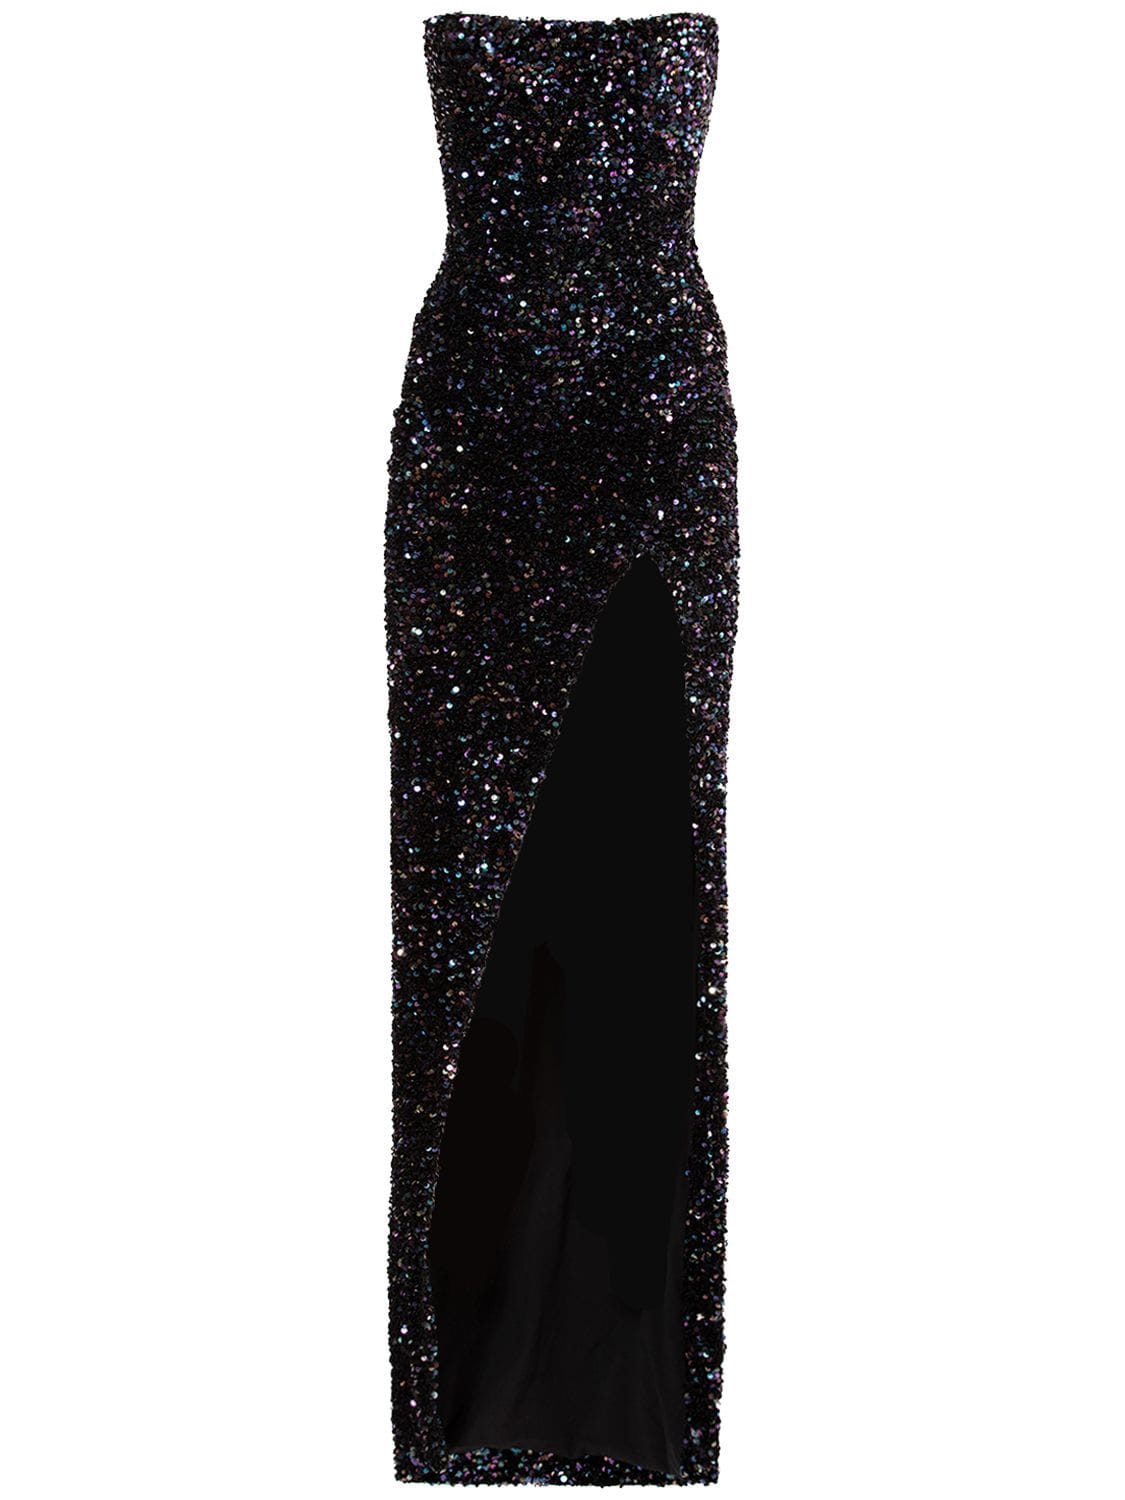 BALMAIN STRAPLESS SEQUINED GOWN